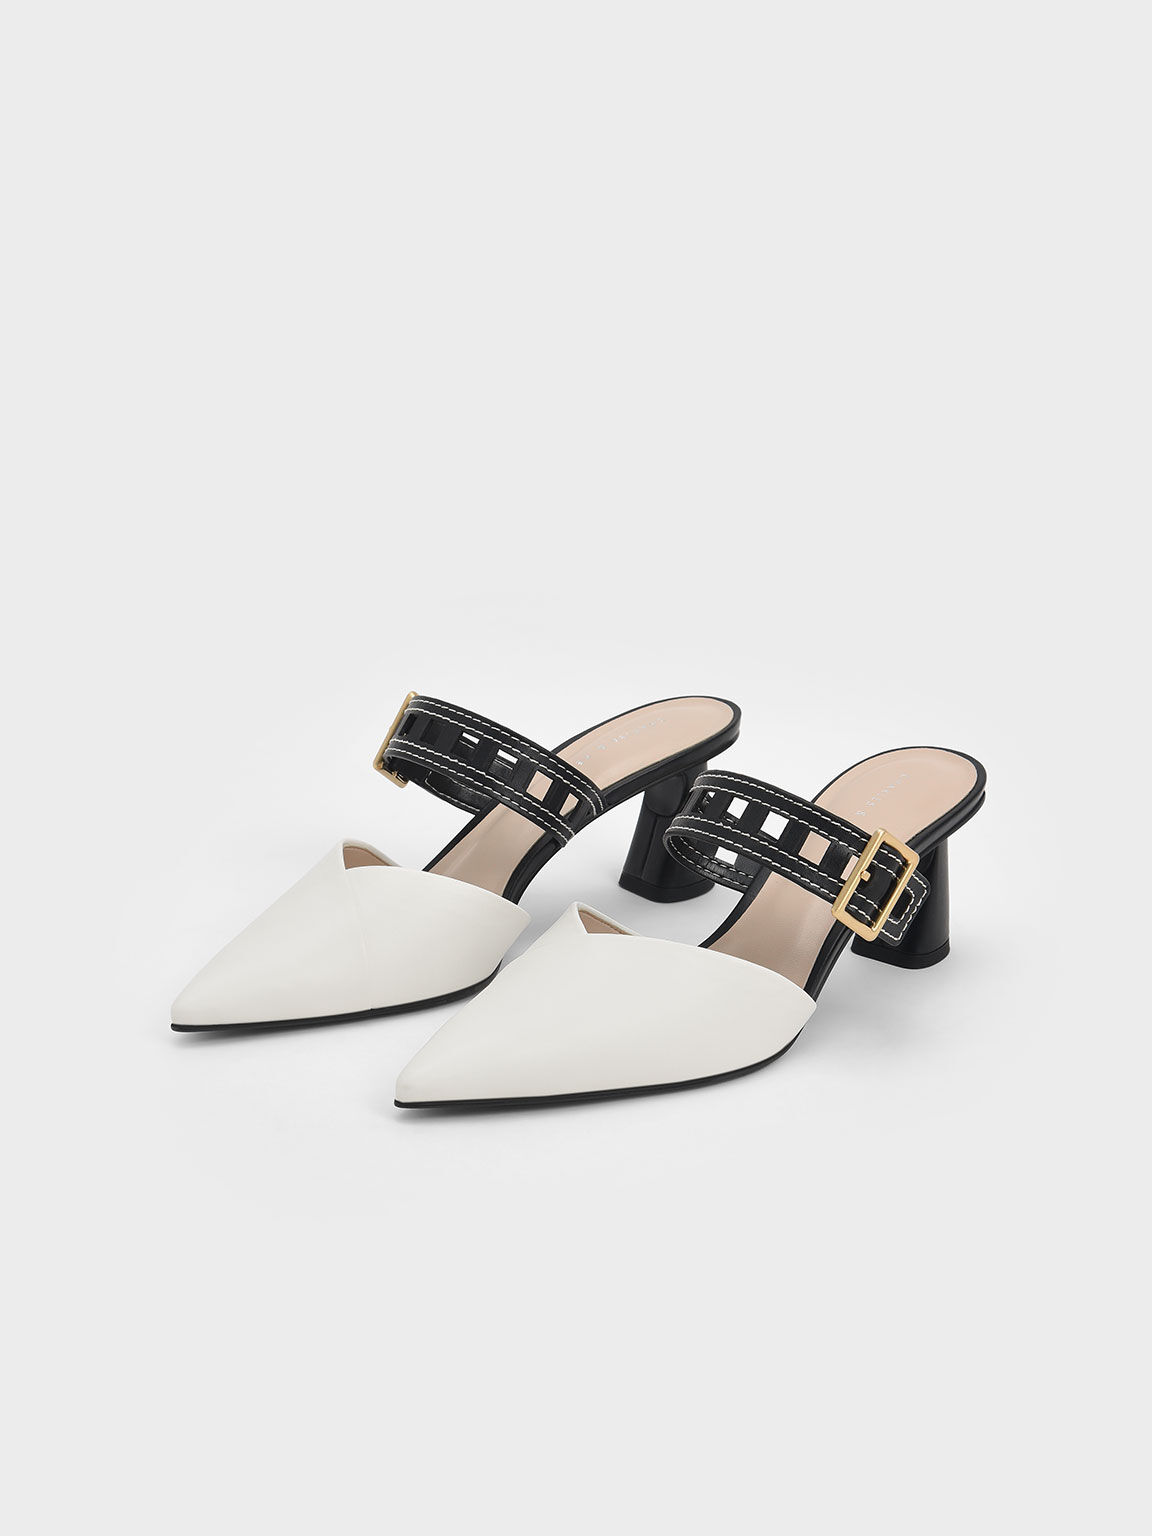 White Sepphe Cut-Out Strap Heeled Mule Pumps - CHARLES & KEITH US